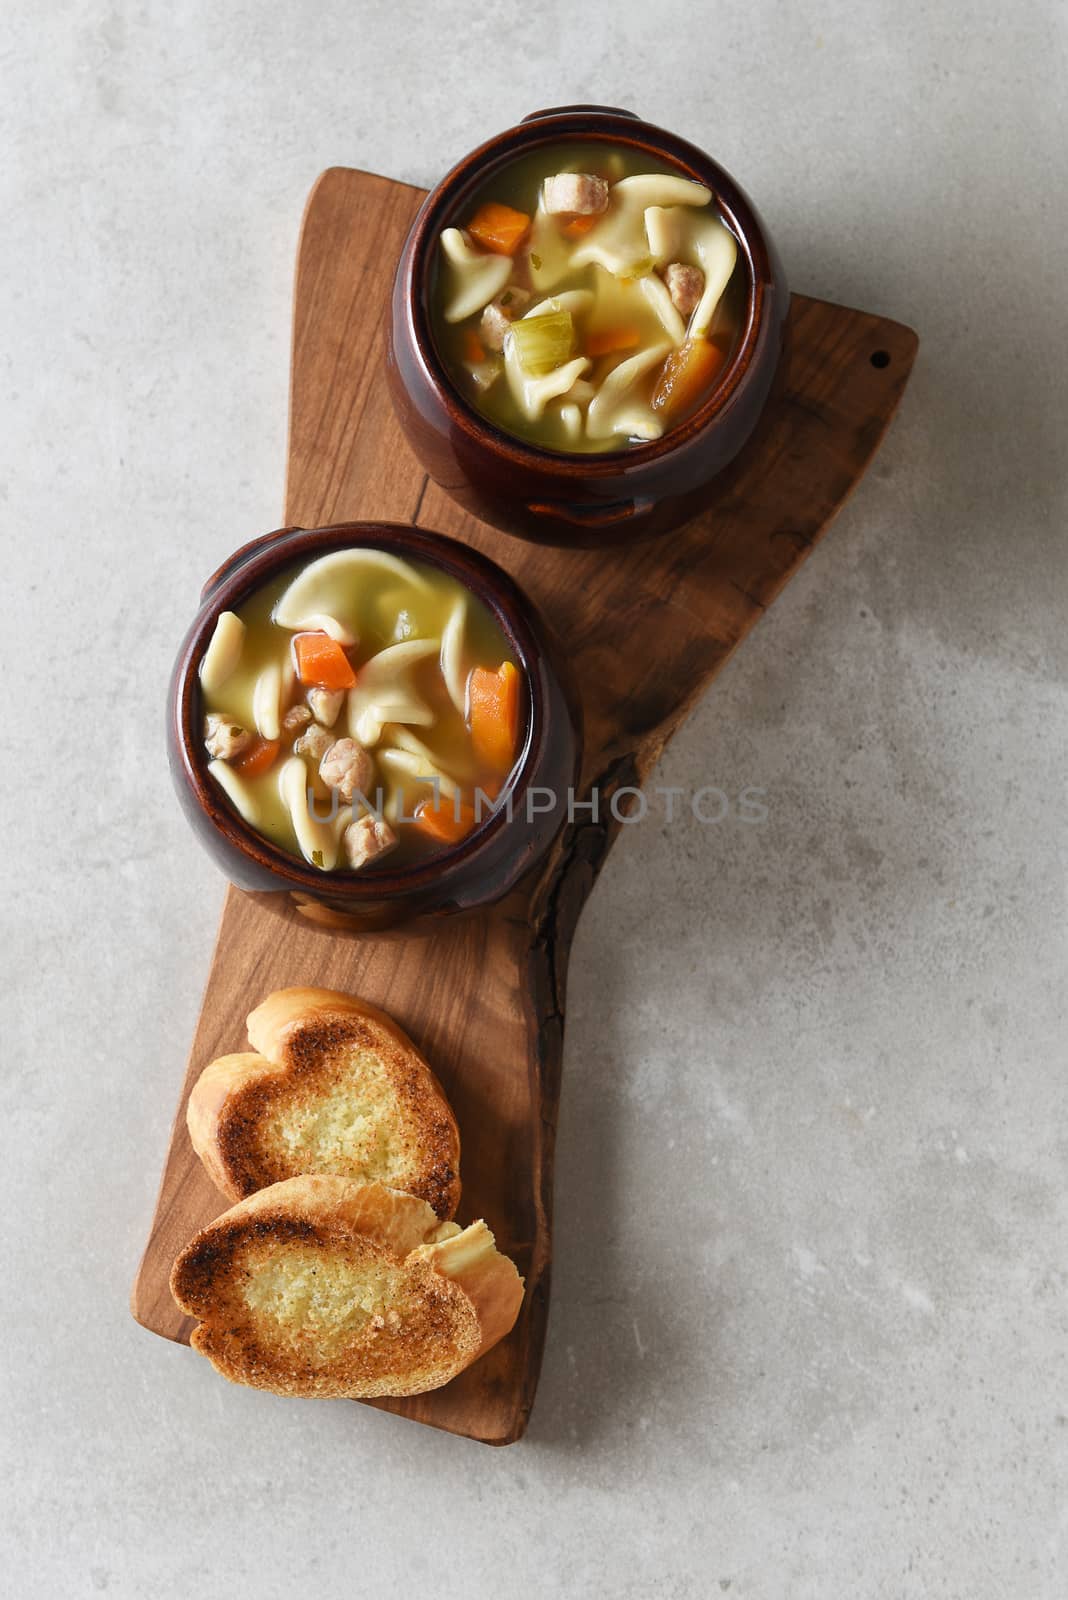 Two crock bowls of fresh homemade Chicken Noodle Soup on a cutti by sCukrov